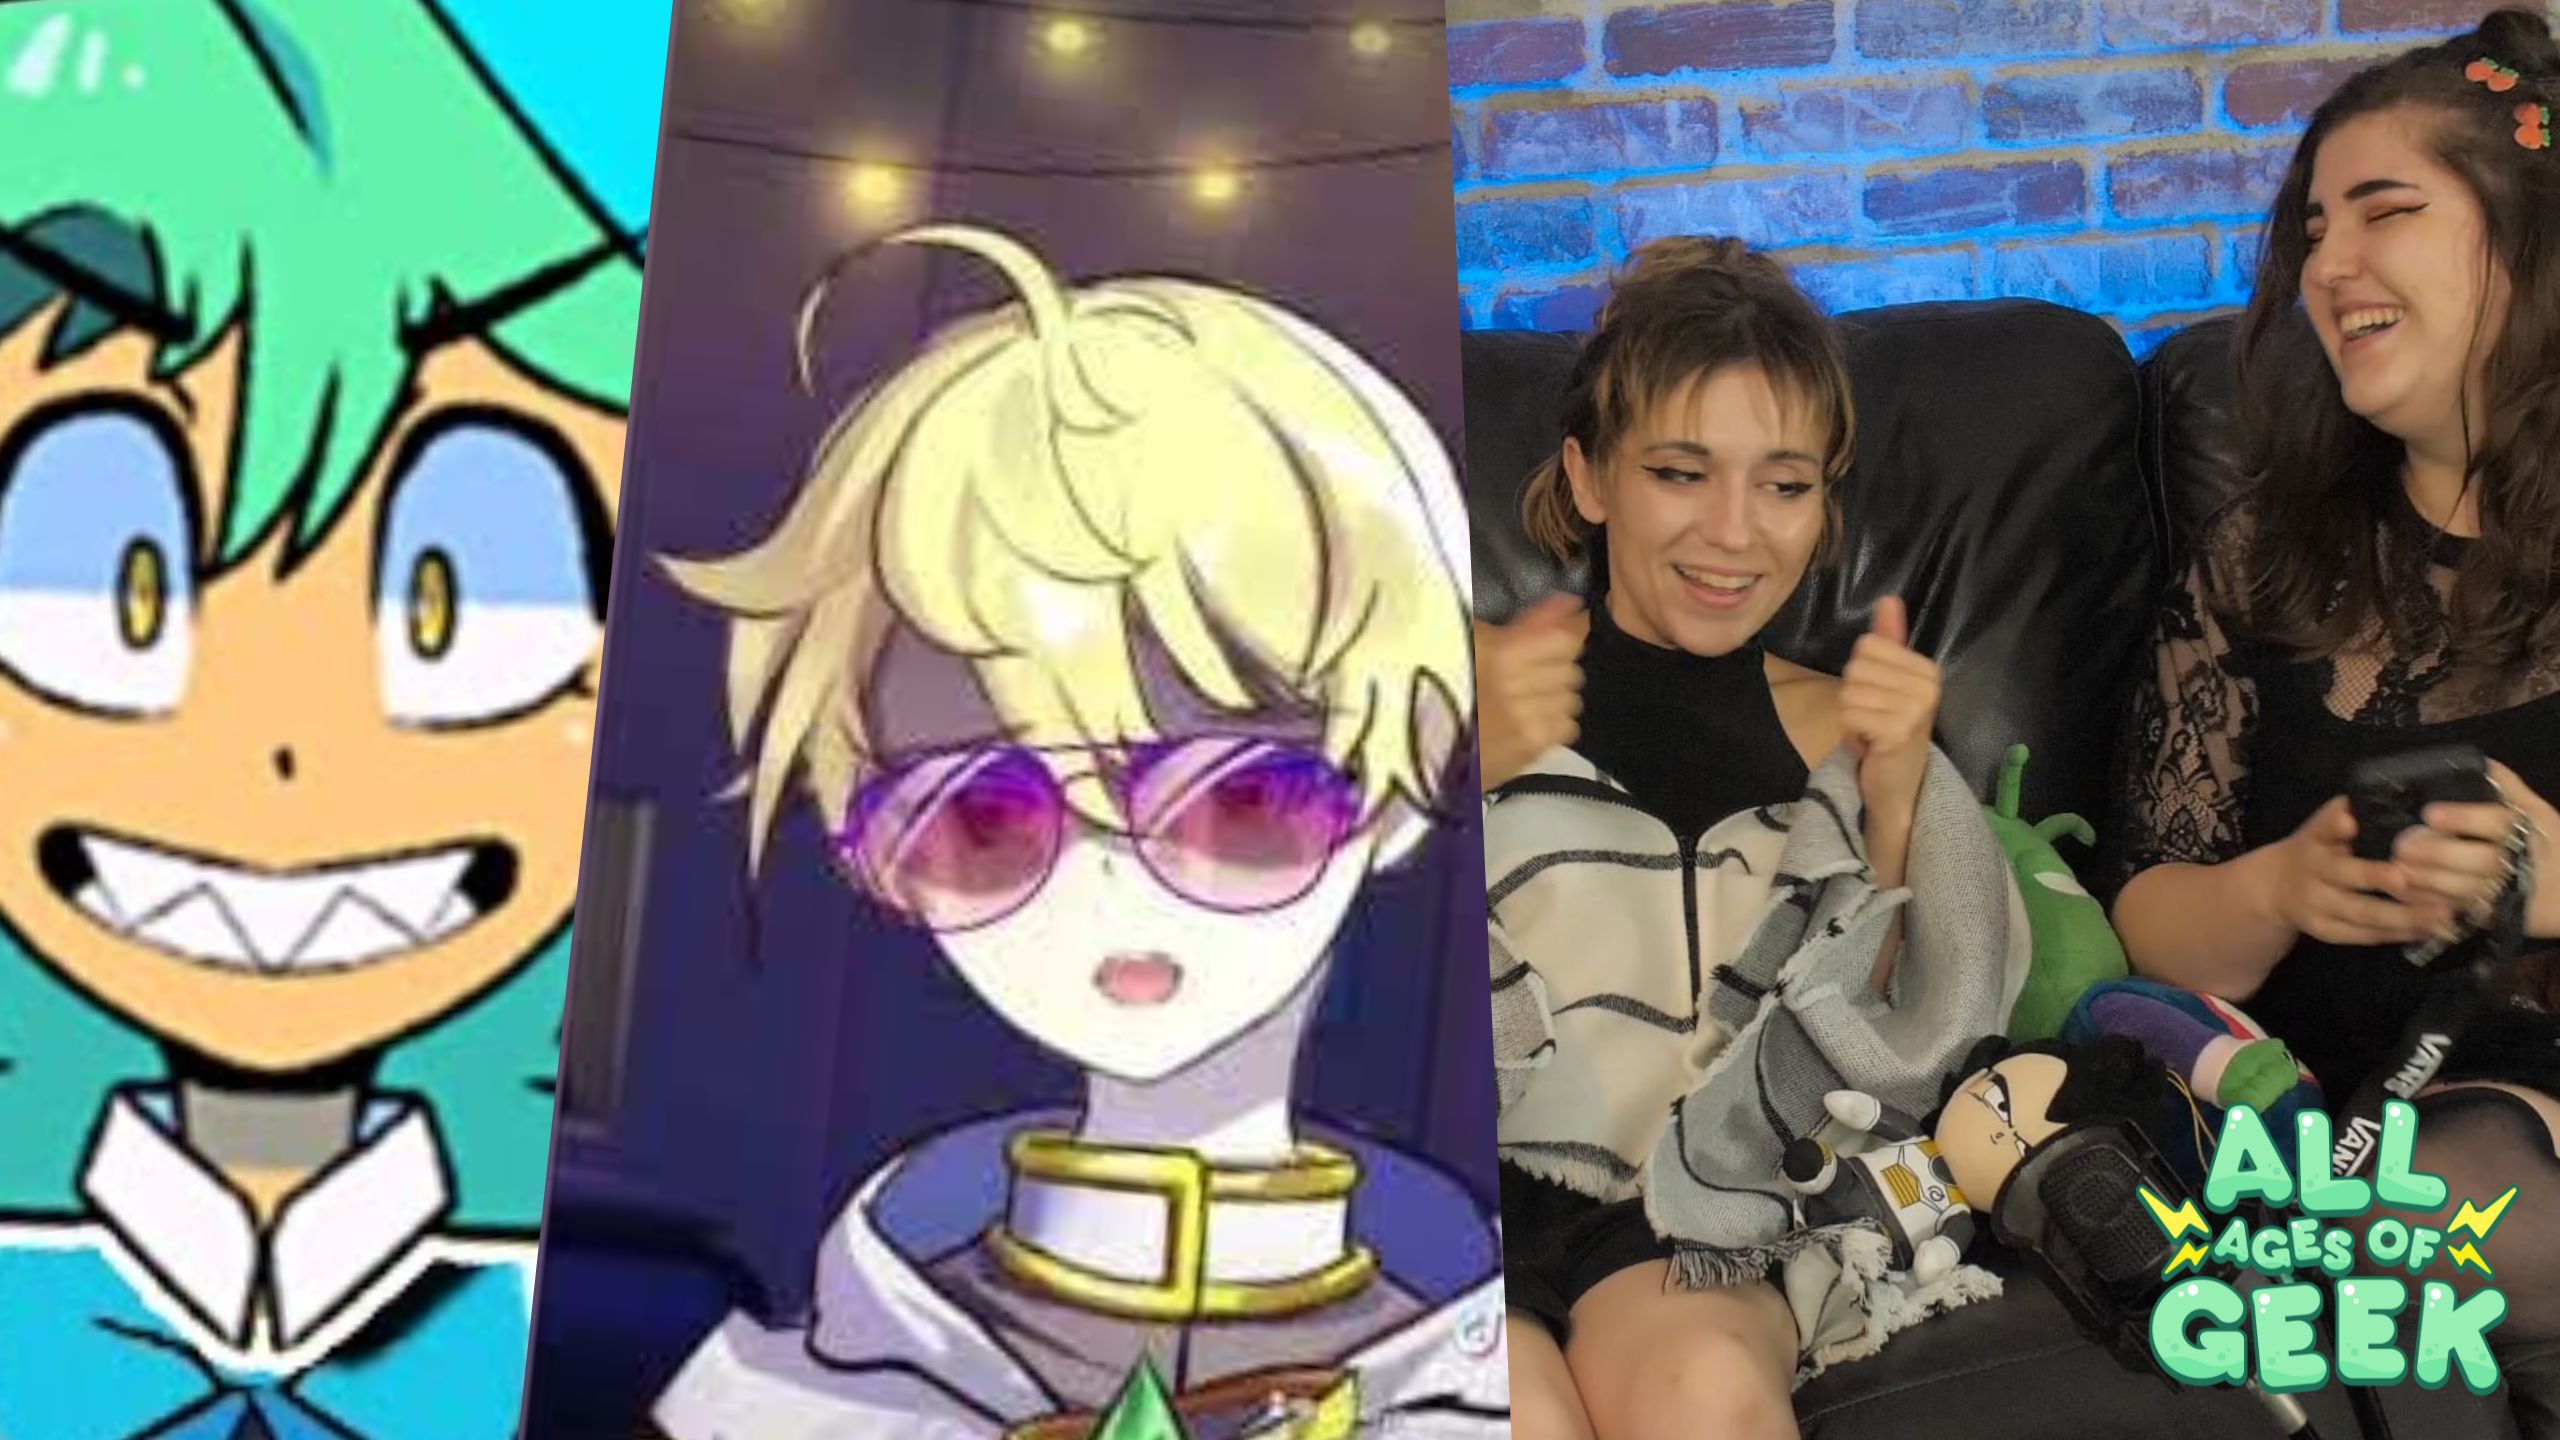 The image features a collage divided into three sections. On the left, a cartoon character with bright turquoise hair grins widely, wearing a blue and white outfit. The middle section showcases an anime-style character with blond hair, donning purple sunglasses and a white and gold ensemble. On the right, two individuals are seated on a couch; the person on the left, with short brown hair, smiles and gives a thumbs up, while the person on the right, with long brown hair, laughs and looks at their phone. The couch is adorned with various plush toys, and the "All Ages of Geek" logo is displayed in the bottom right corner.